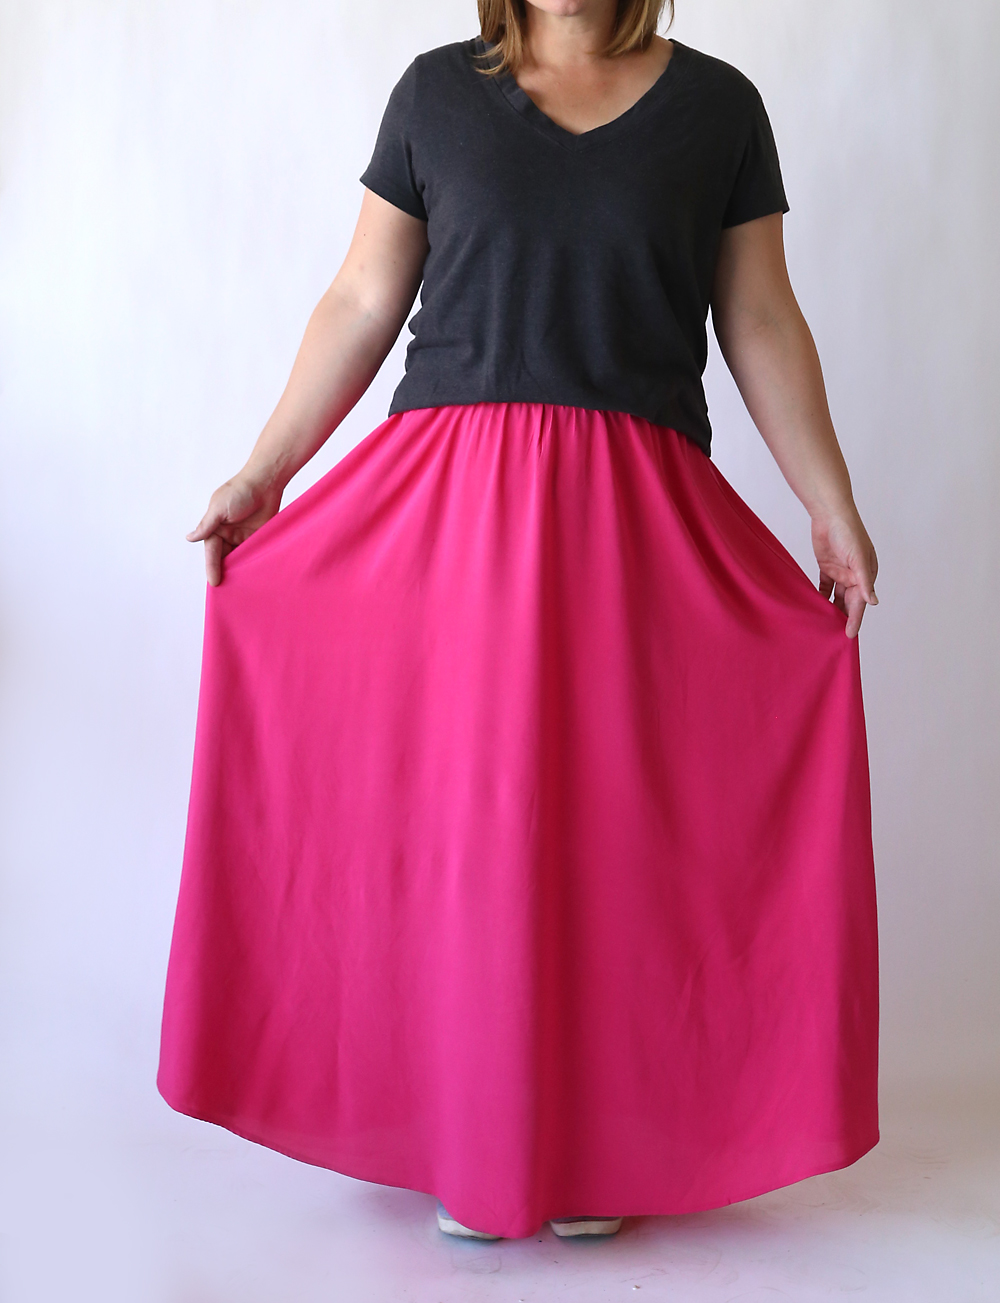 A woman wearing a long pink maxi skirt made from woven fabric